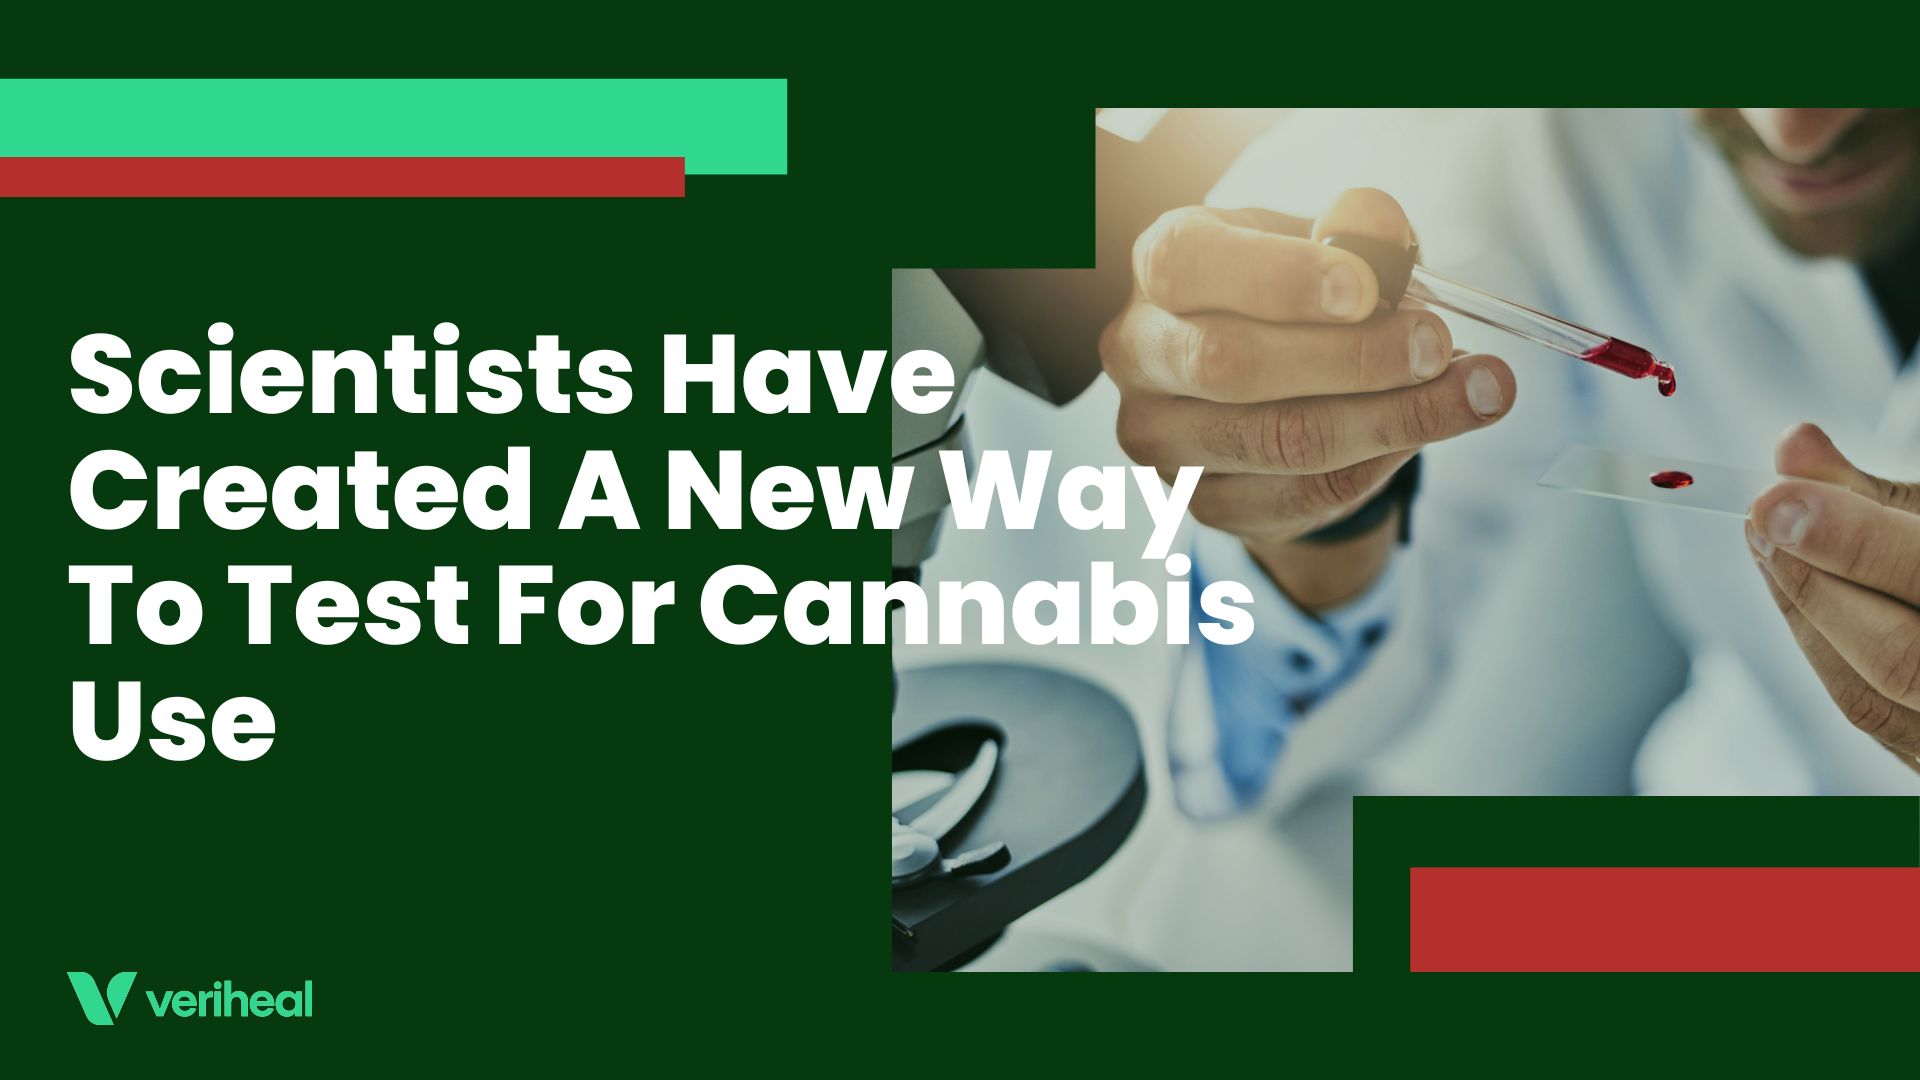 Scientists Have Created A New Way To Test For Cannabis Use